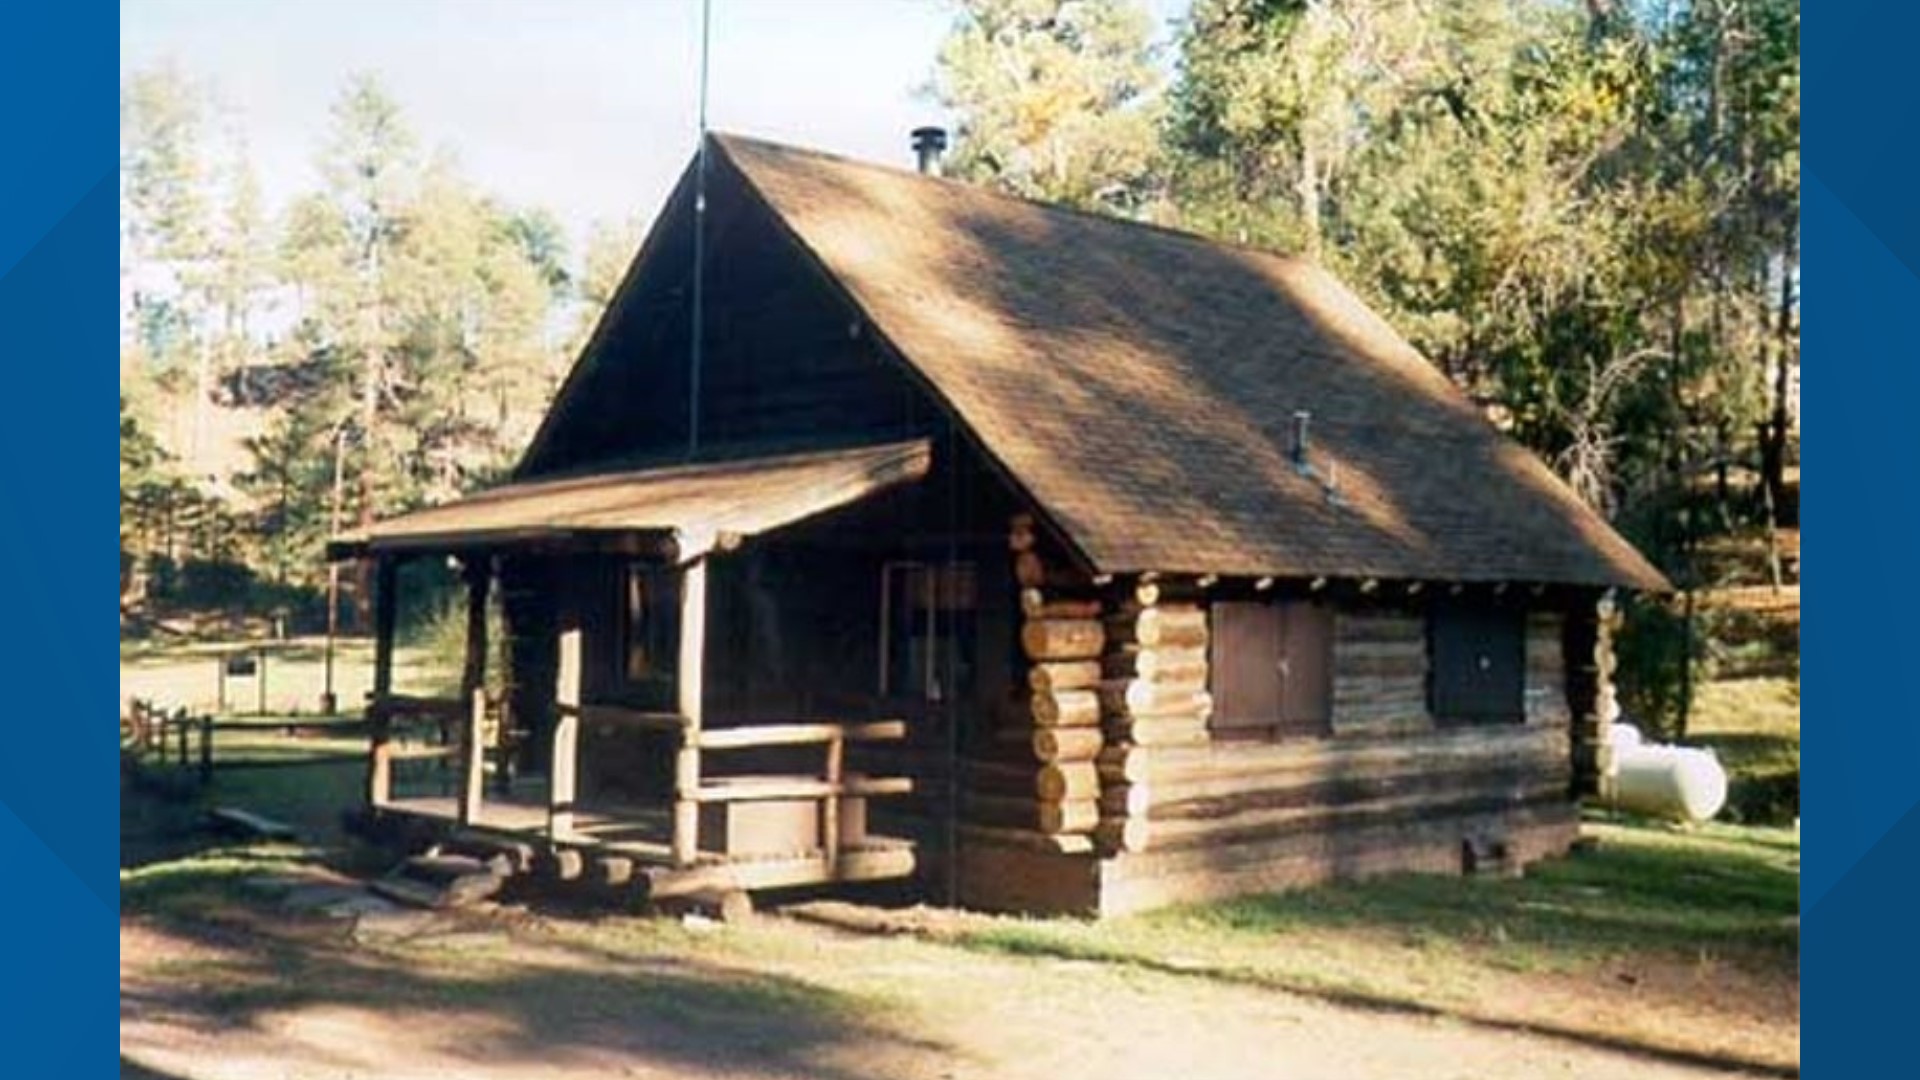 The "Rooms With a View" program allows citizens to rent out a historic cabin located in Arizona's parks and forests. Over 2,500 reservations are made each year.